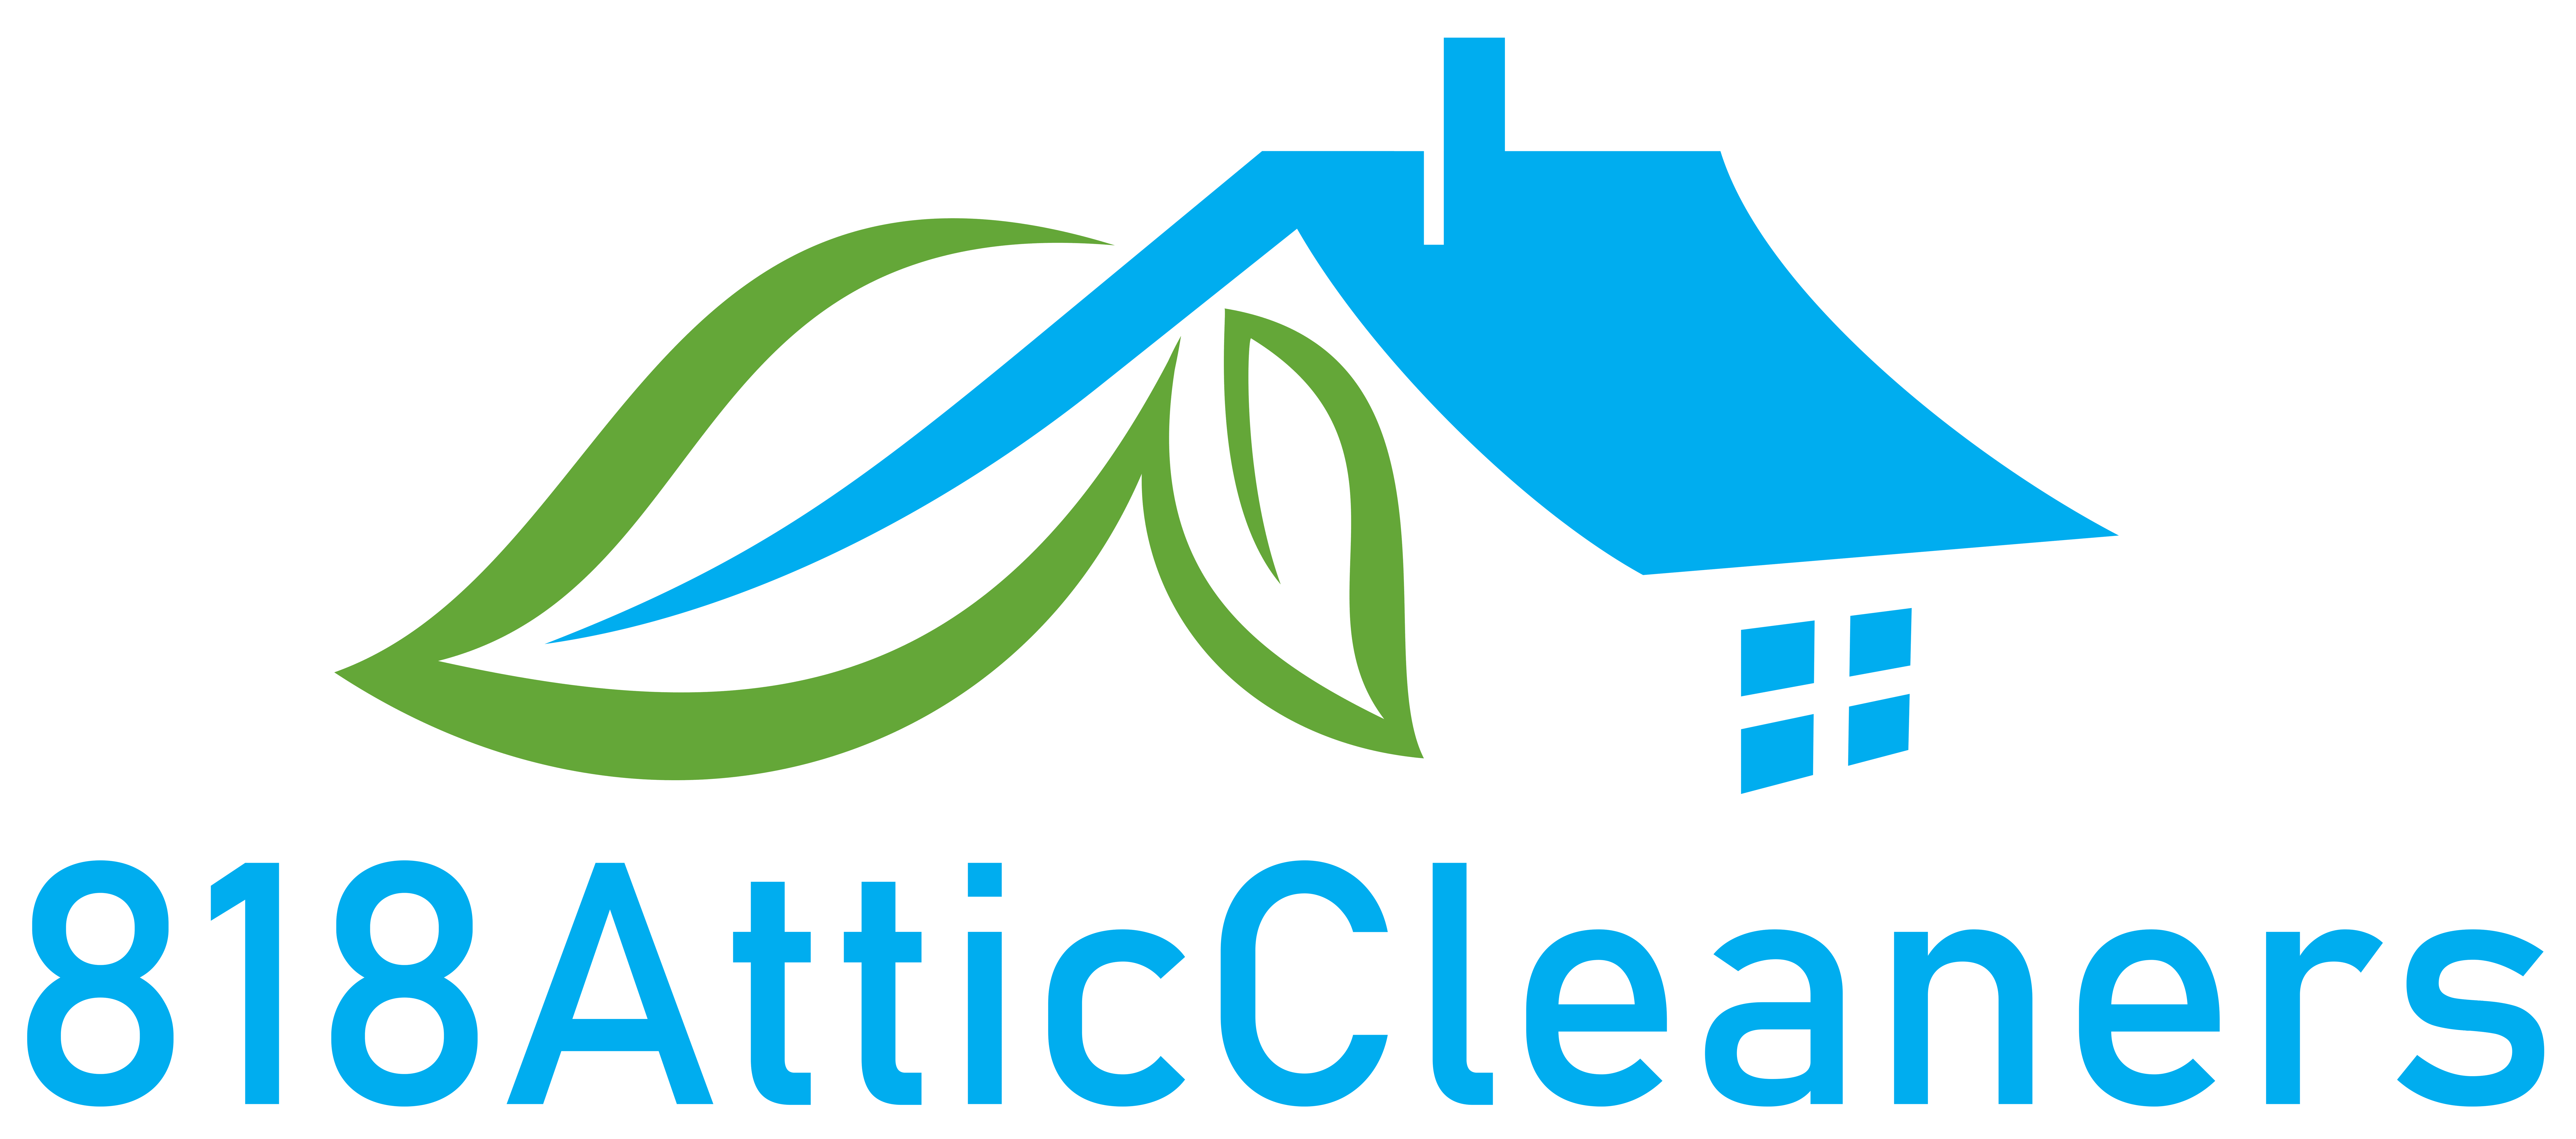 818 Attic Cleaners – Best Cleaning Service